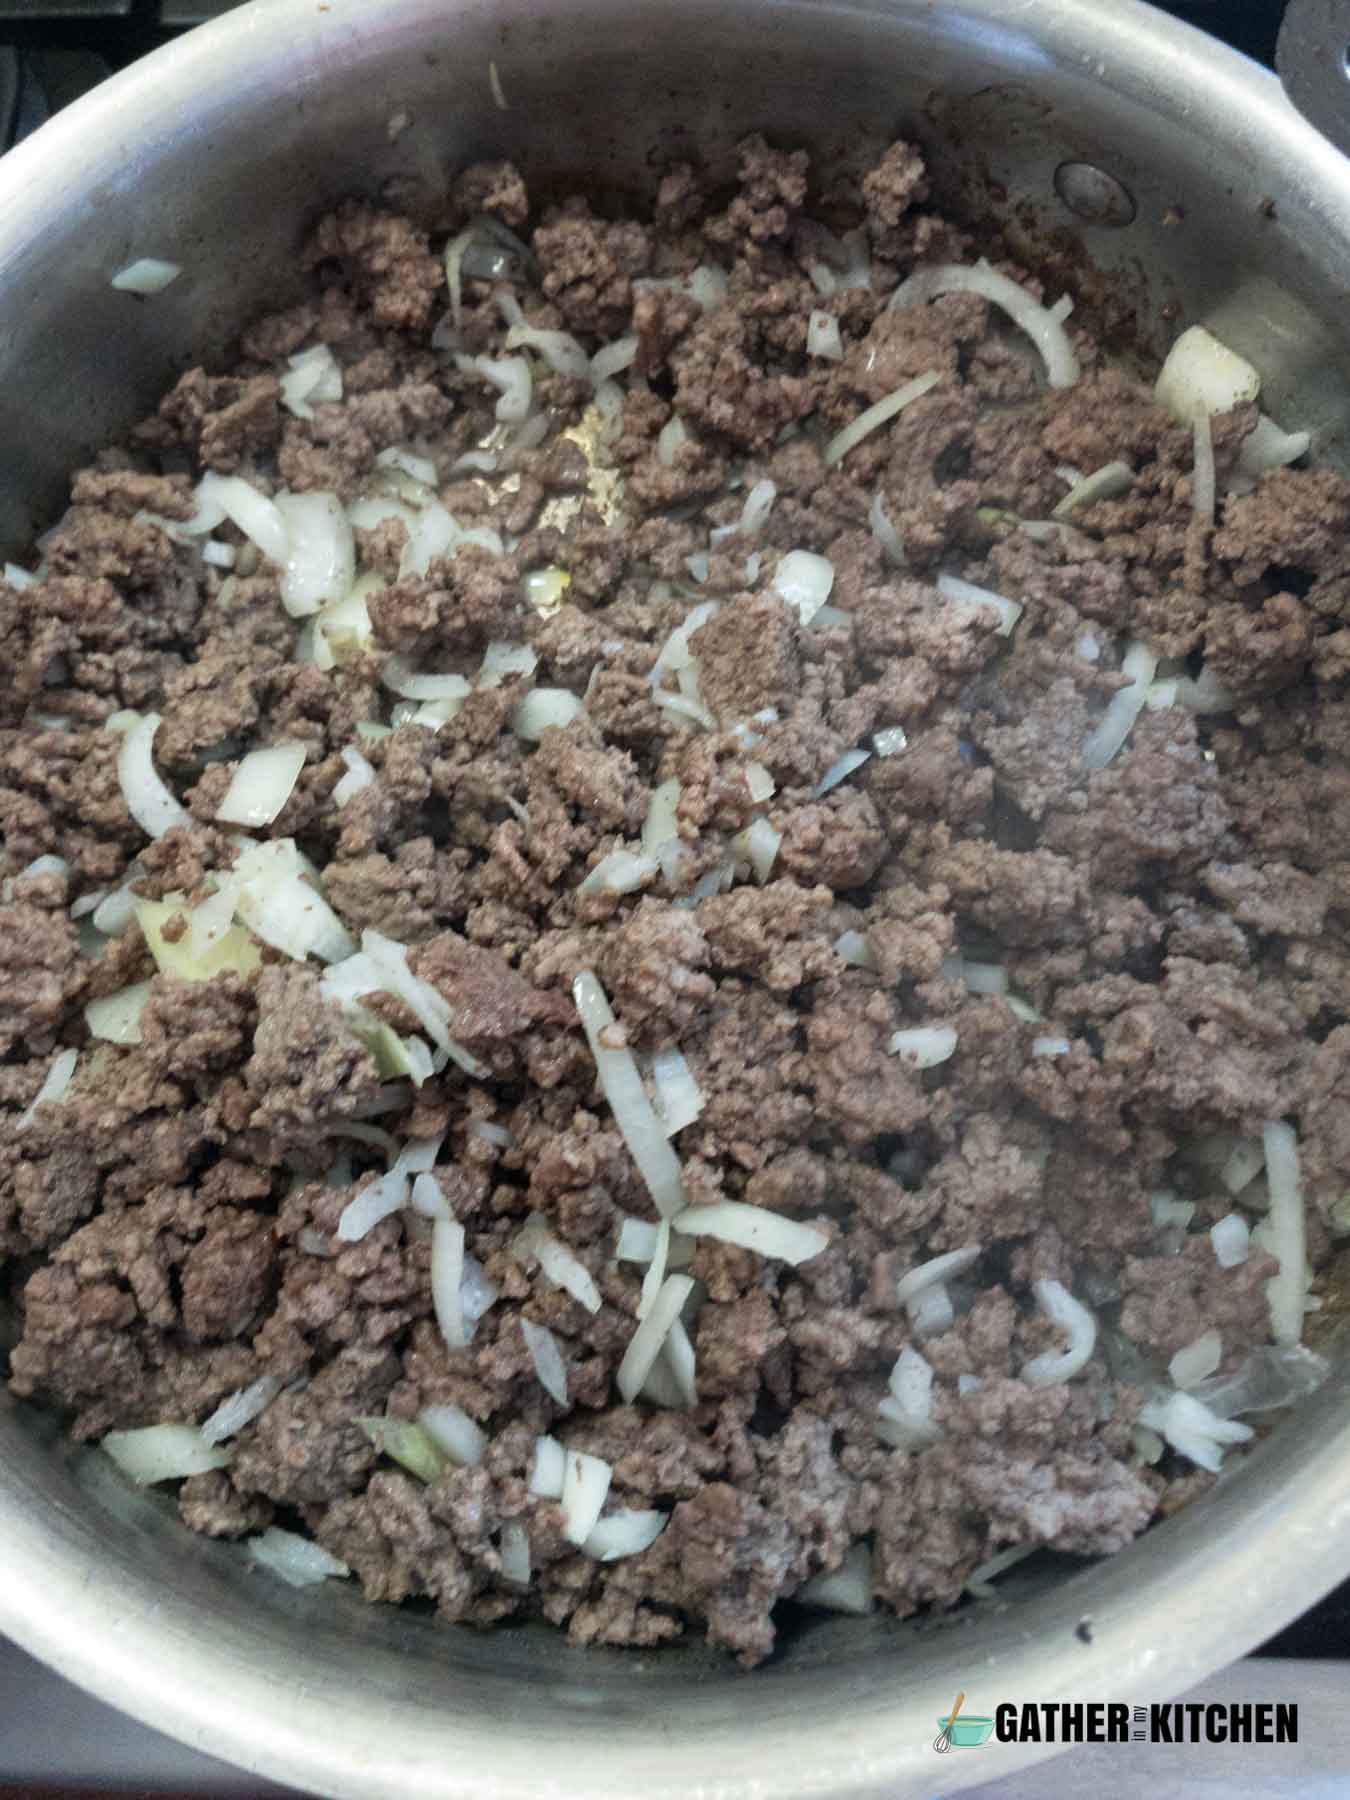 Cooking ground beef, with onions and garlic.